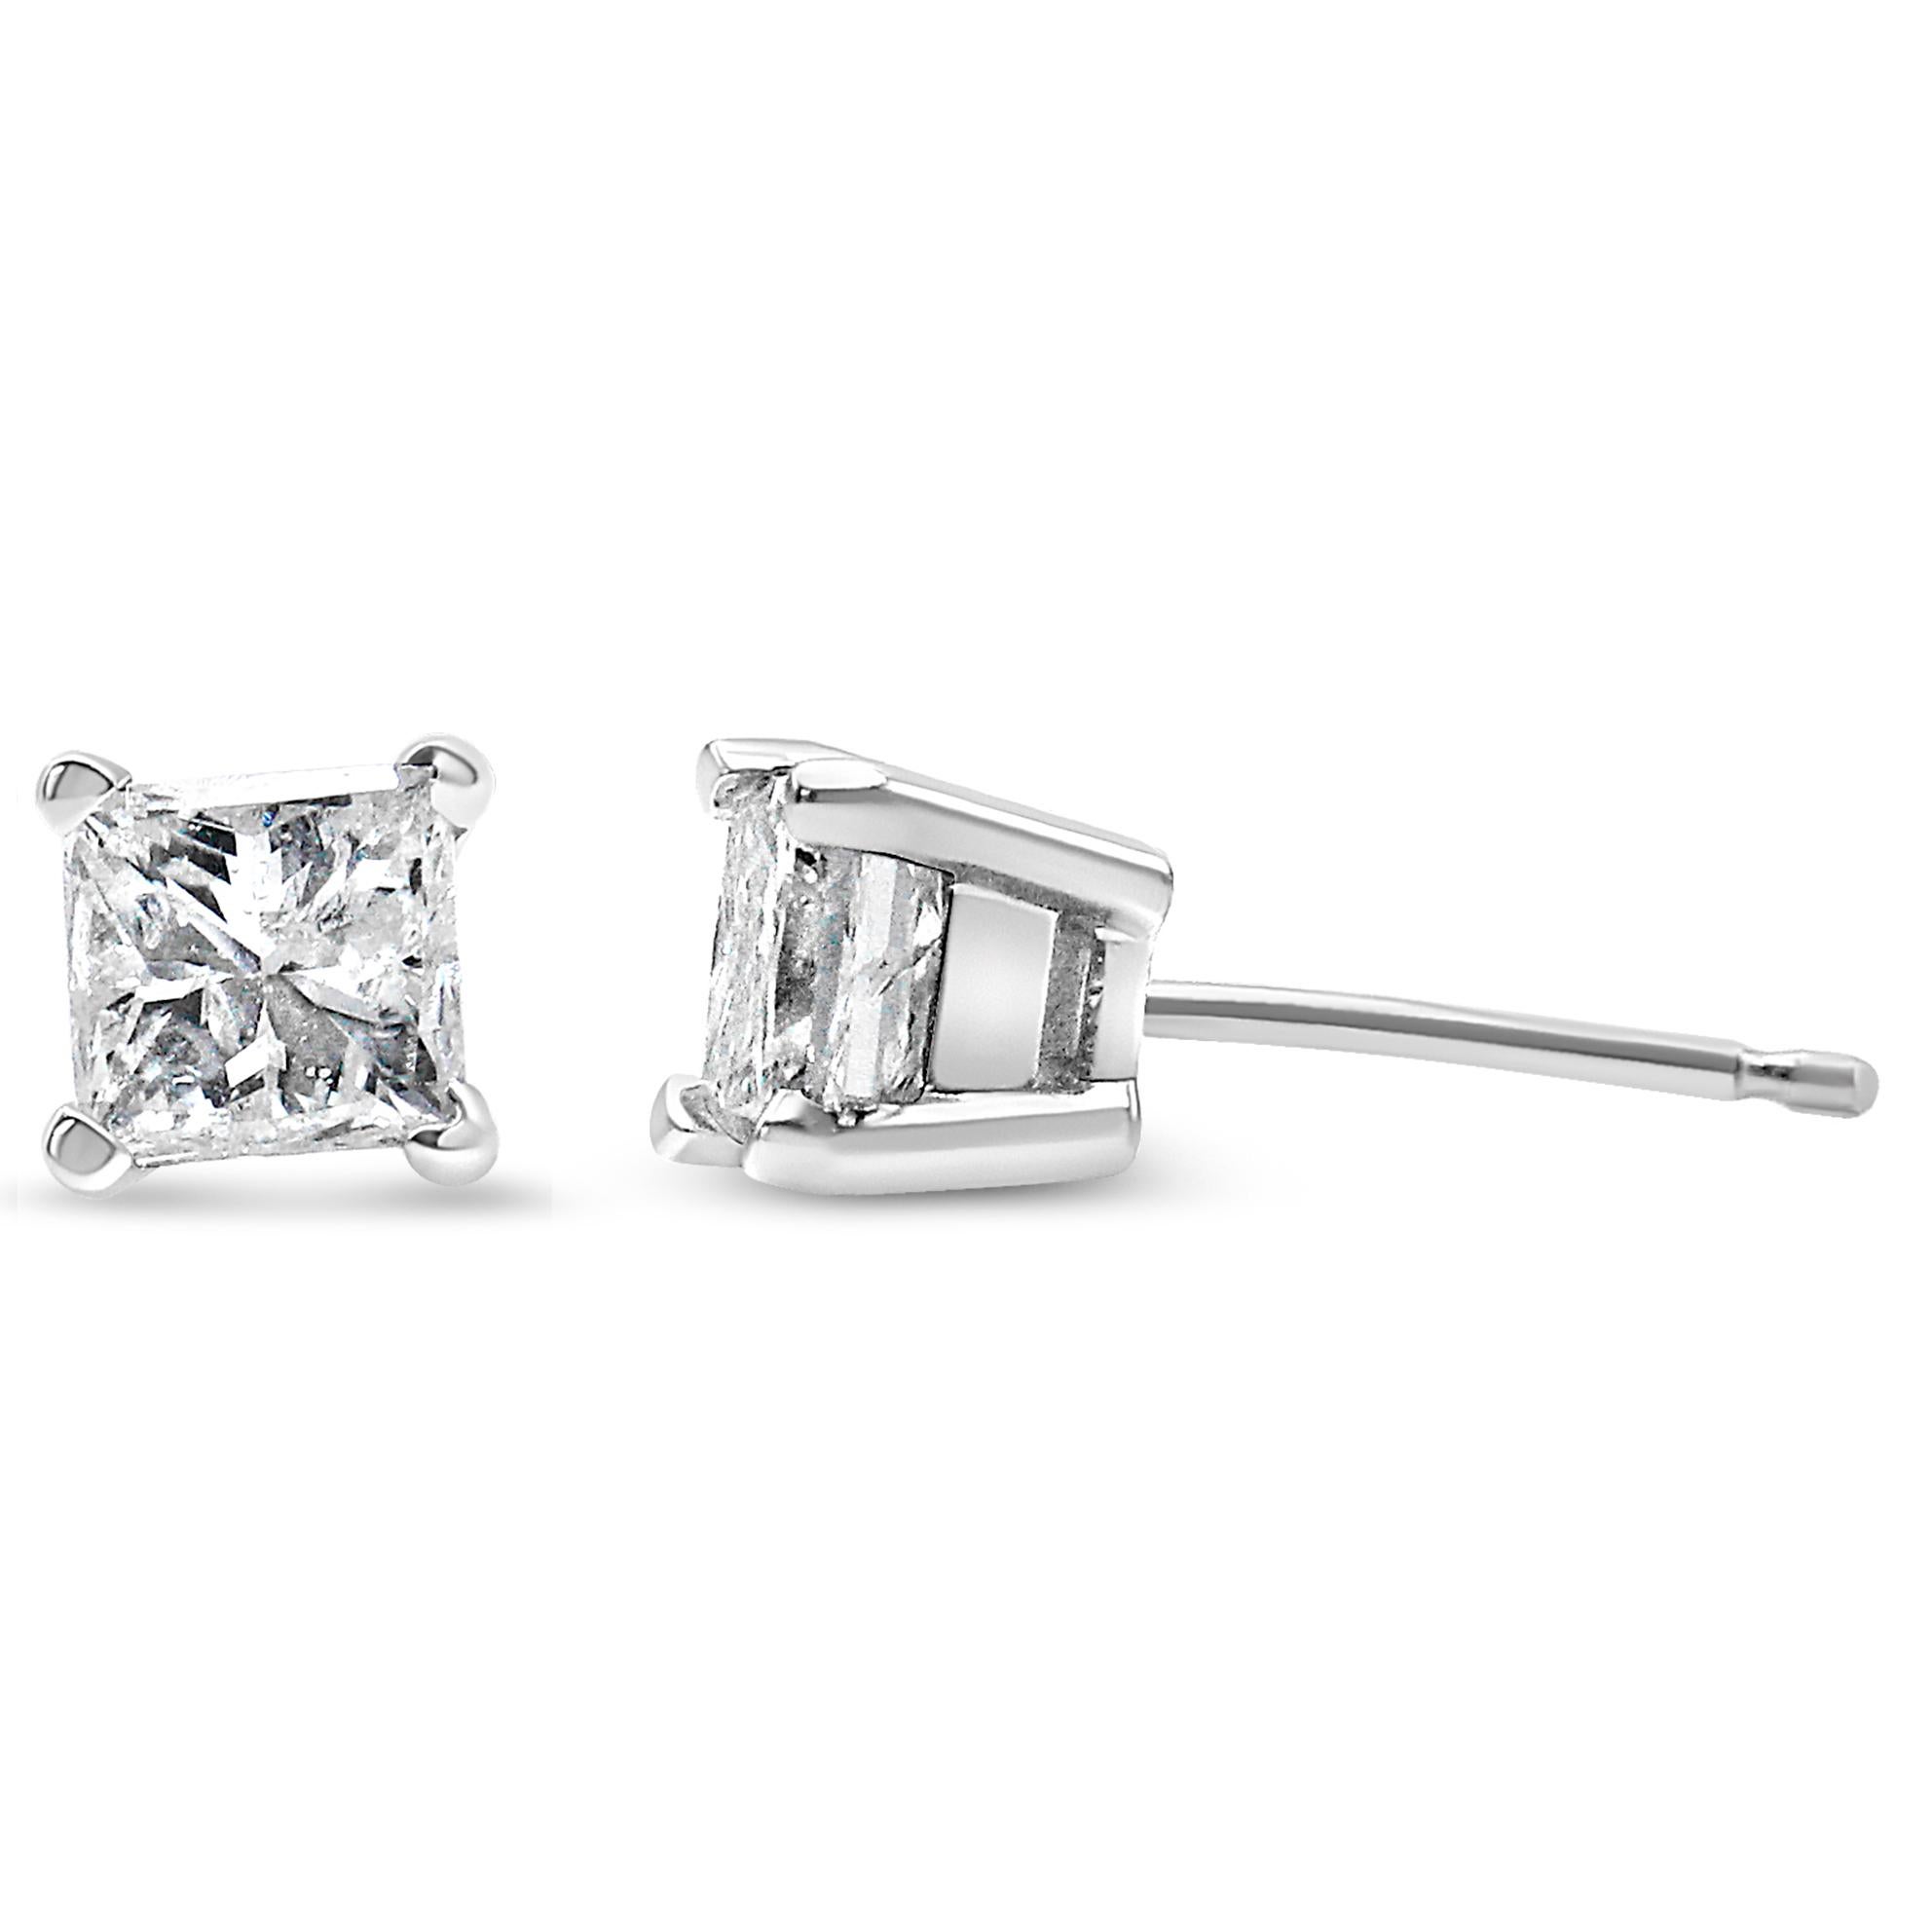 Contemporary AGS Certified 14K White Gold 1.0 Carat Princess-Cut Diamond Stud Earrings For Sale